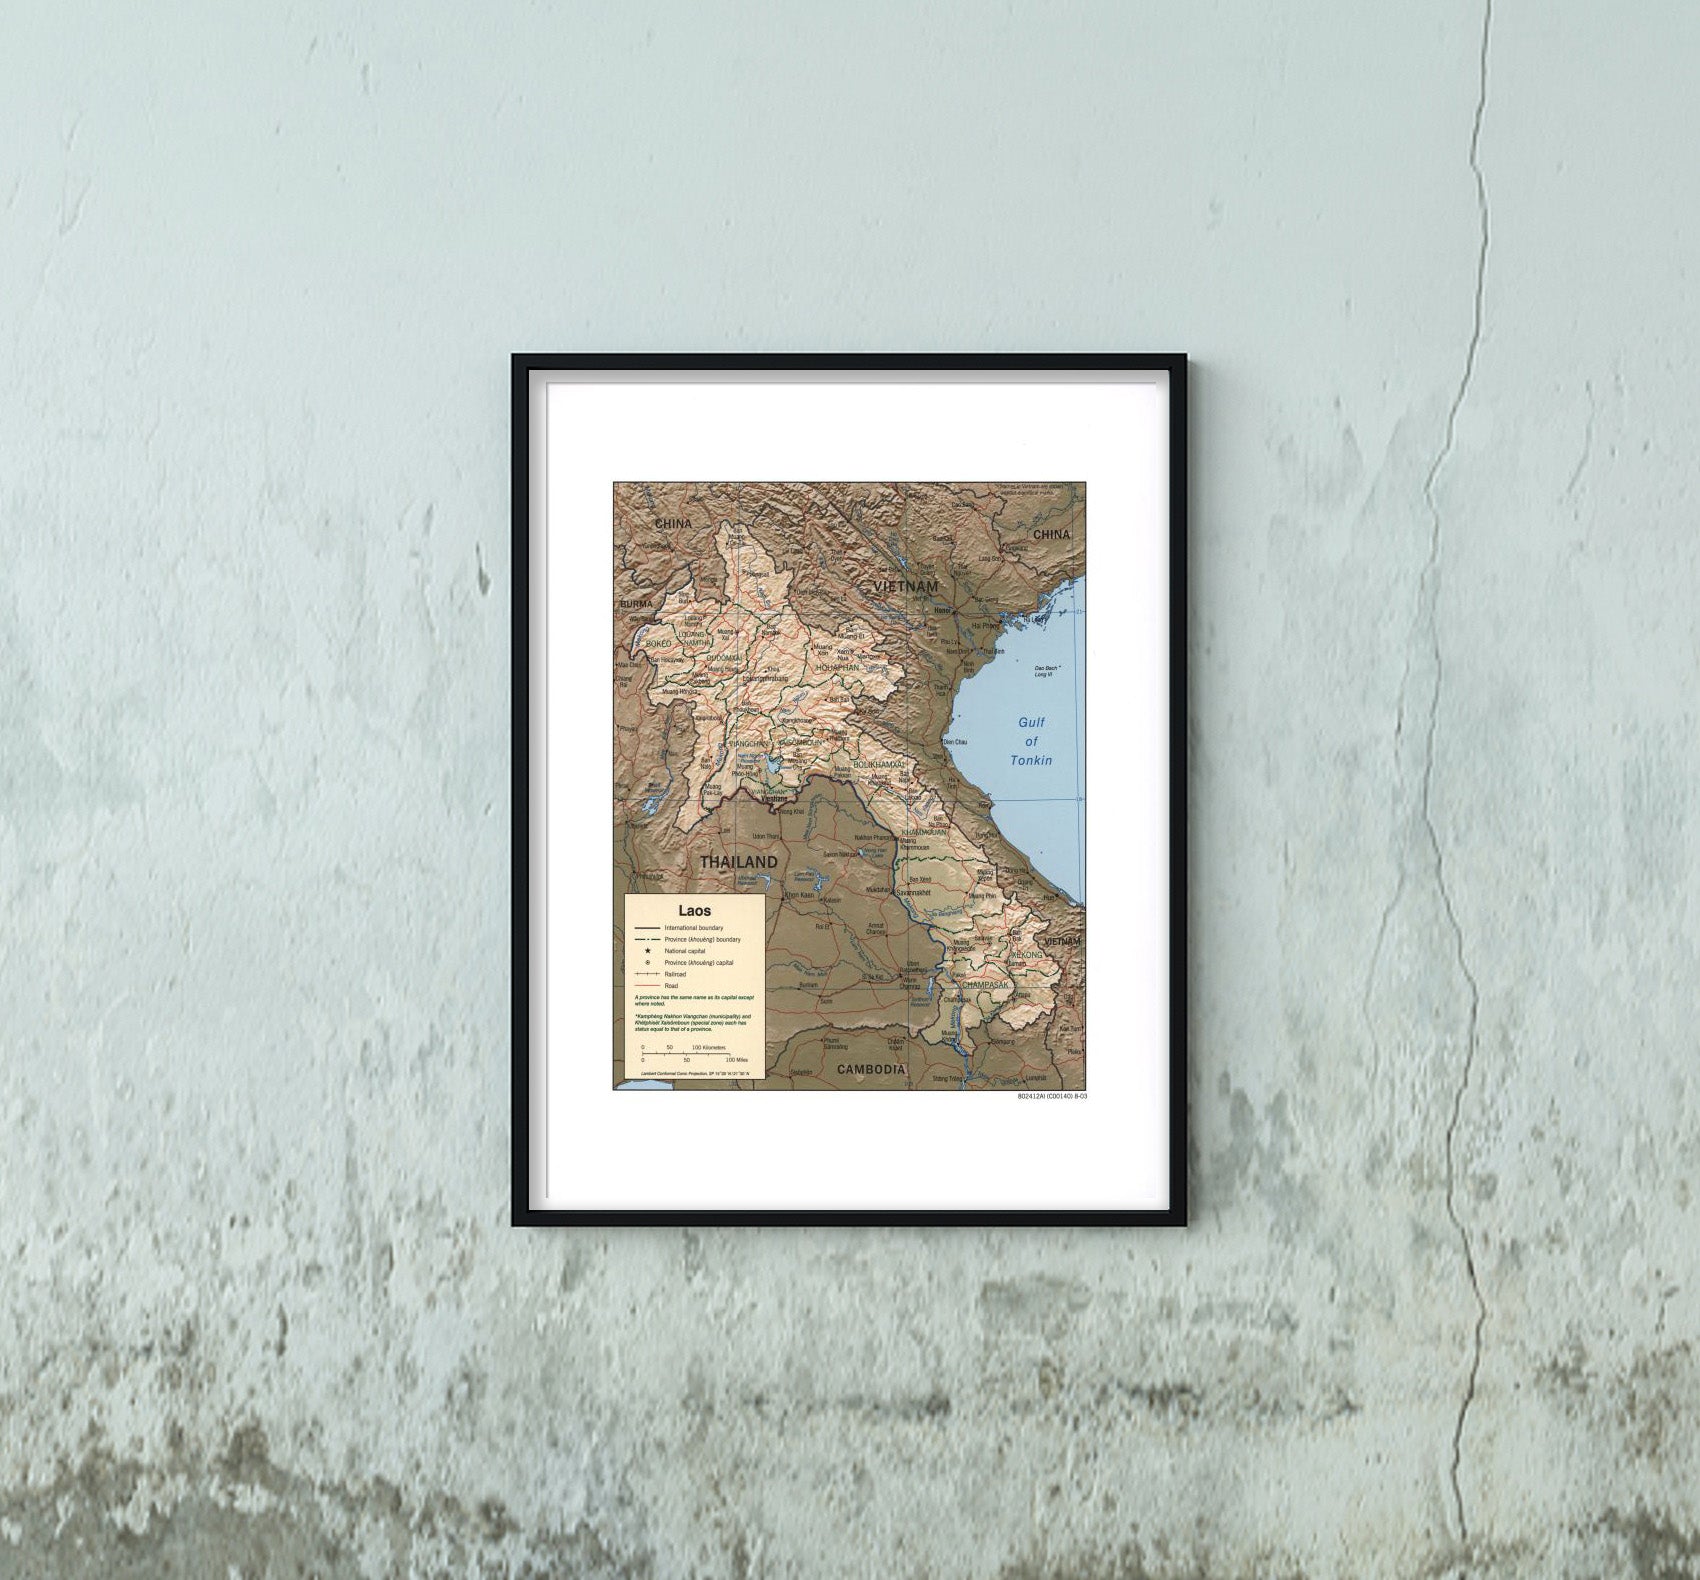 2003 Map|Title: Laos|Subject: Laos 18 inches x 24 inches |Fits 18x24 size frame - New York Map Company